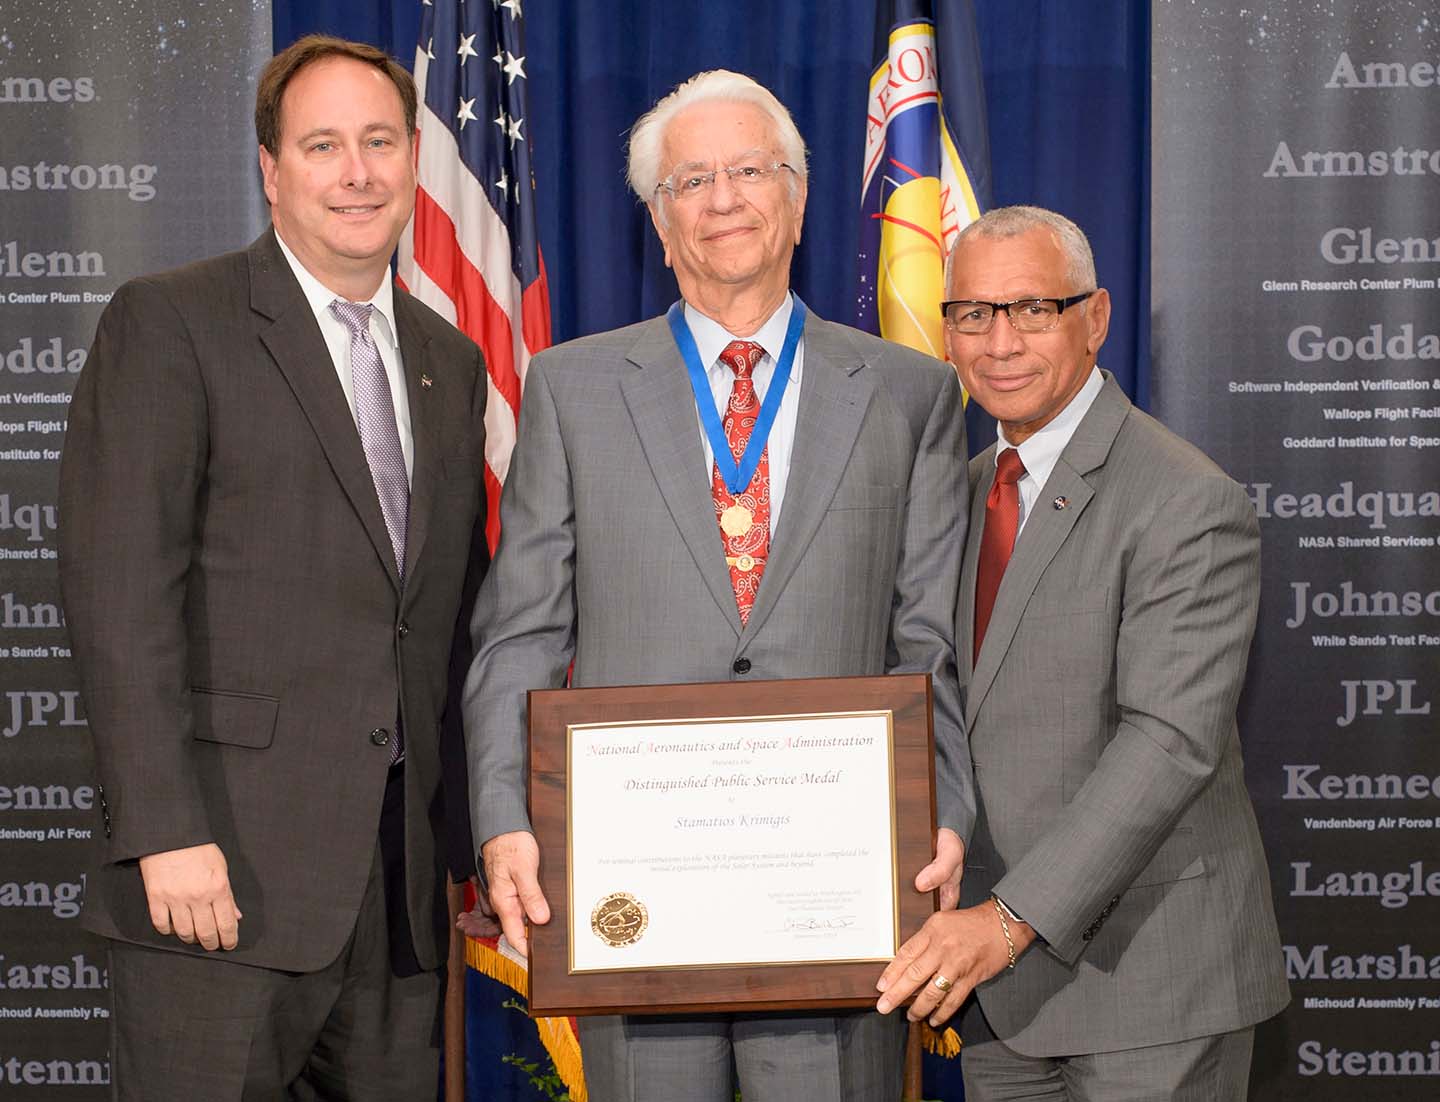 APL’s Tom Krimigis (center) receives the NASA Distinguished Public Service Medal from Associate Administrator Robert Lightfoot (left) and Administrator Charlie Bolden (right)